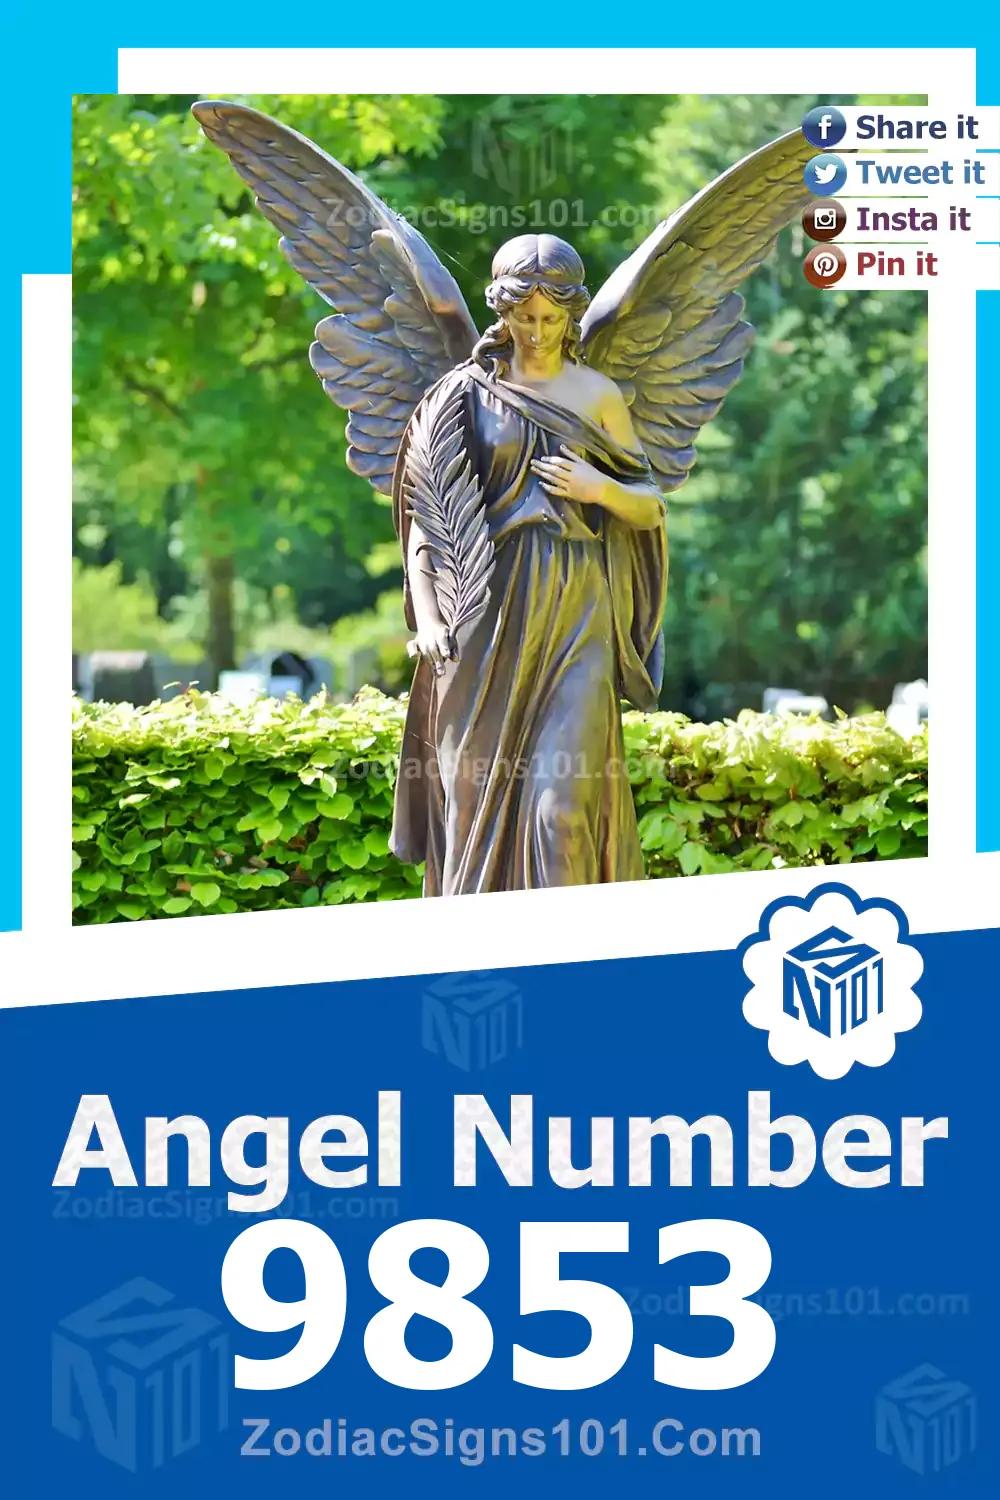 9853 Angel Number Meaning